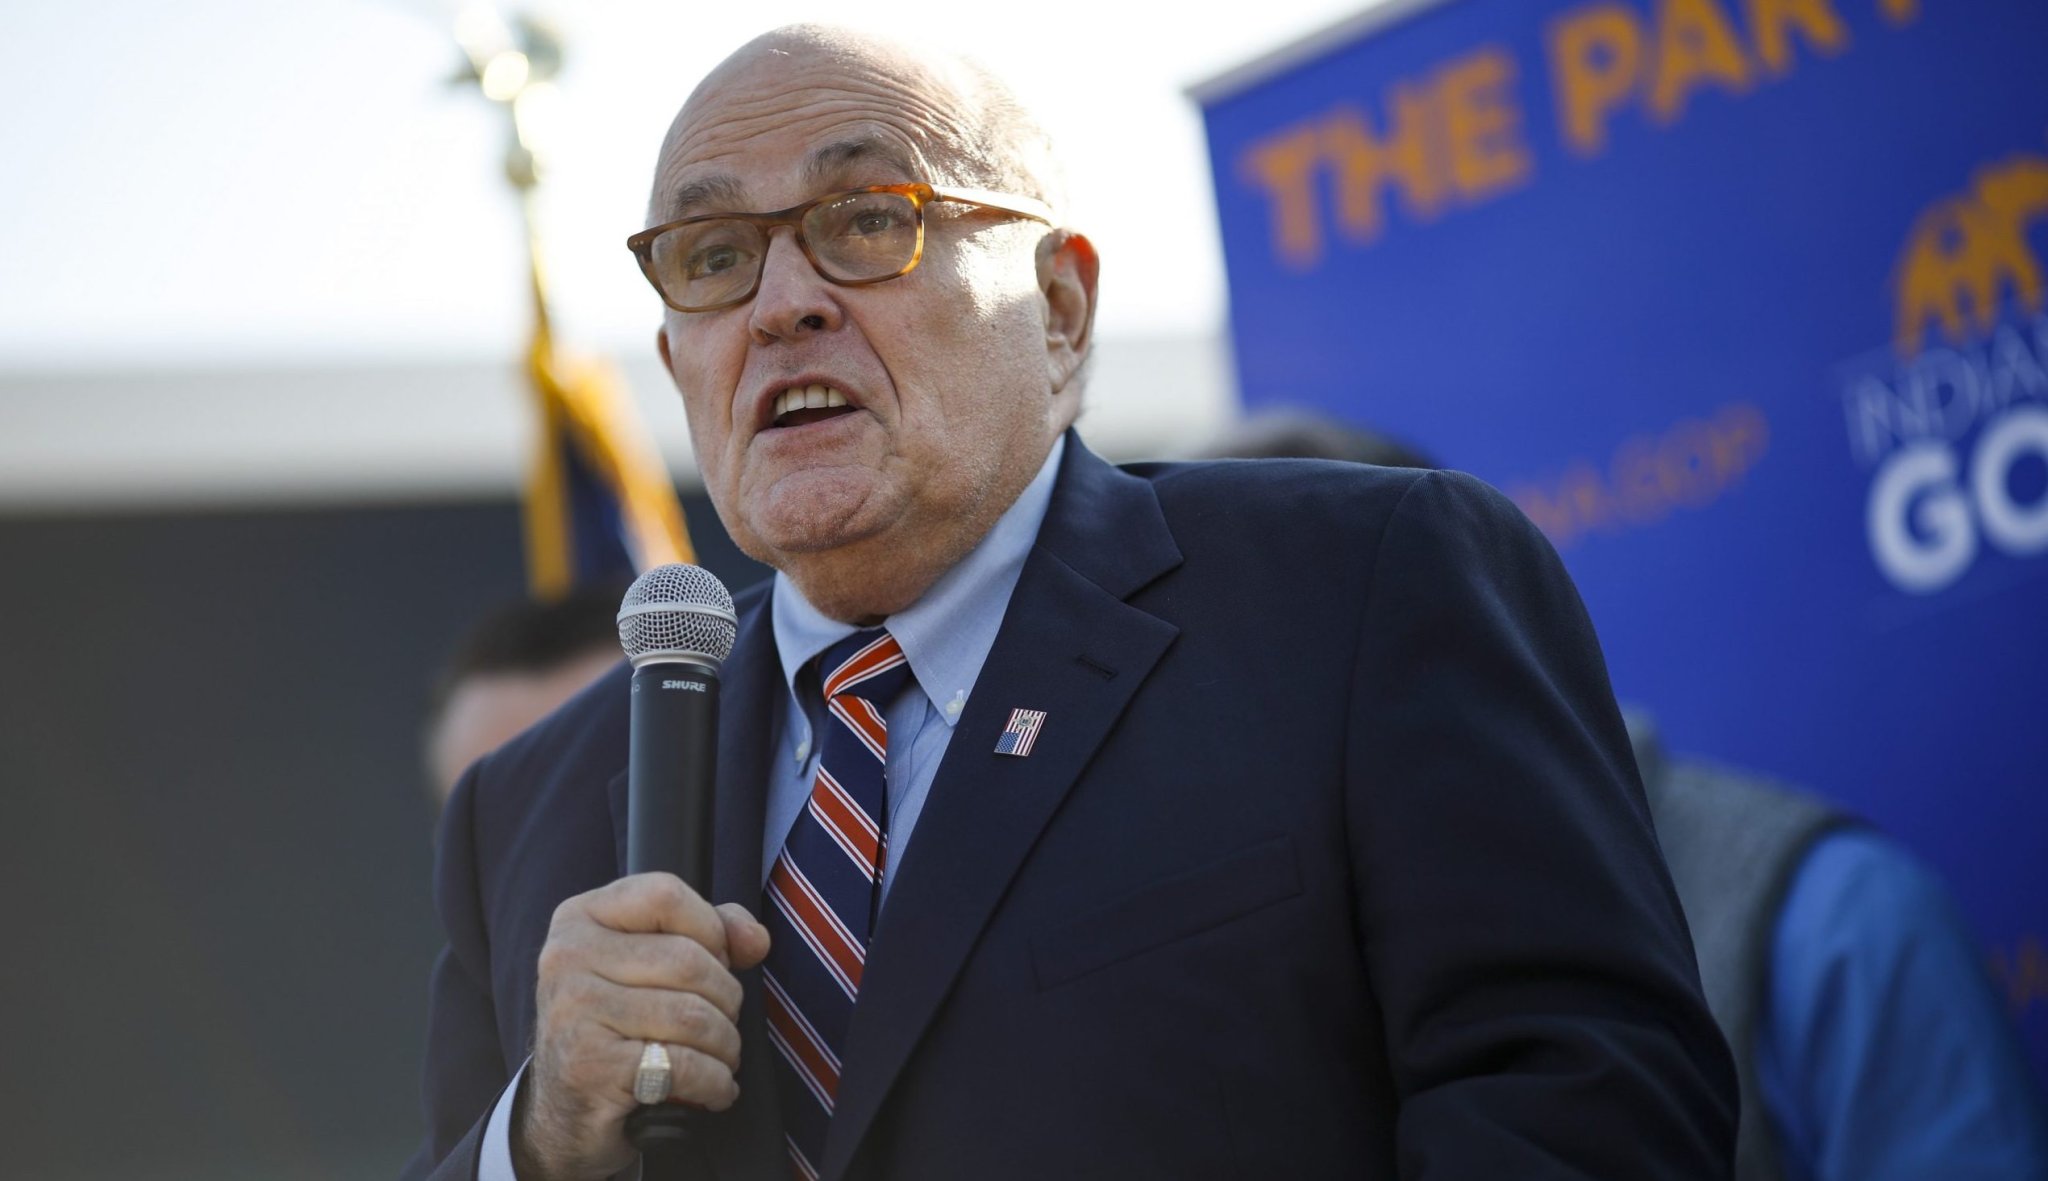 Rudy Giuliani warns 'Black Lives Matter wants to take your house'